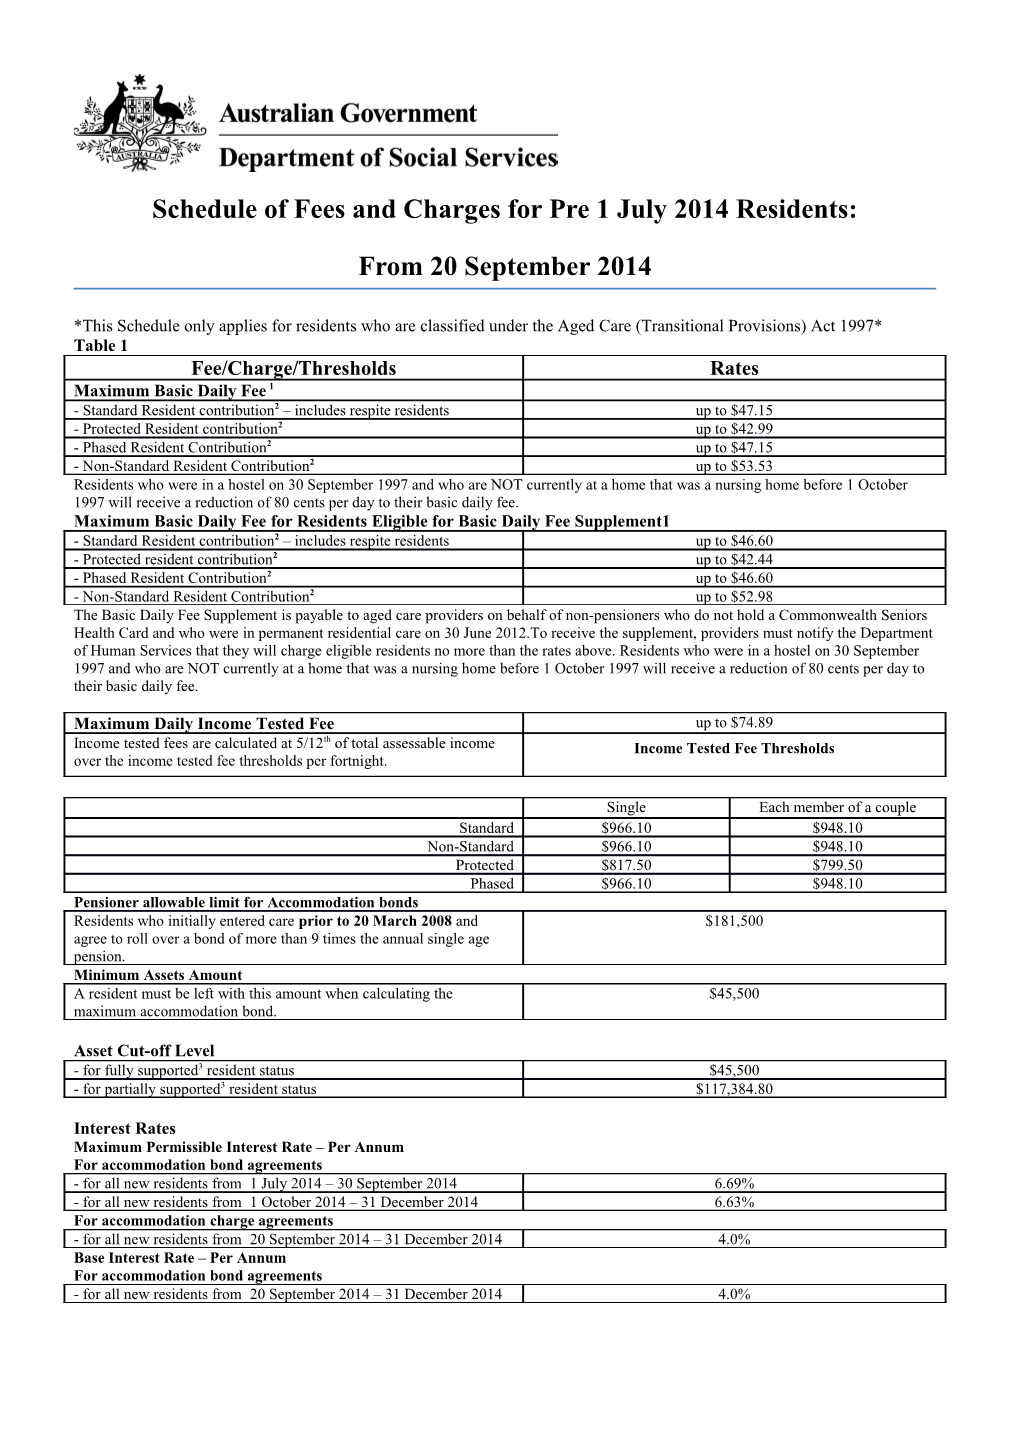 Schedule of Fees and Charges for Pre 1 July 2014 Residents